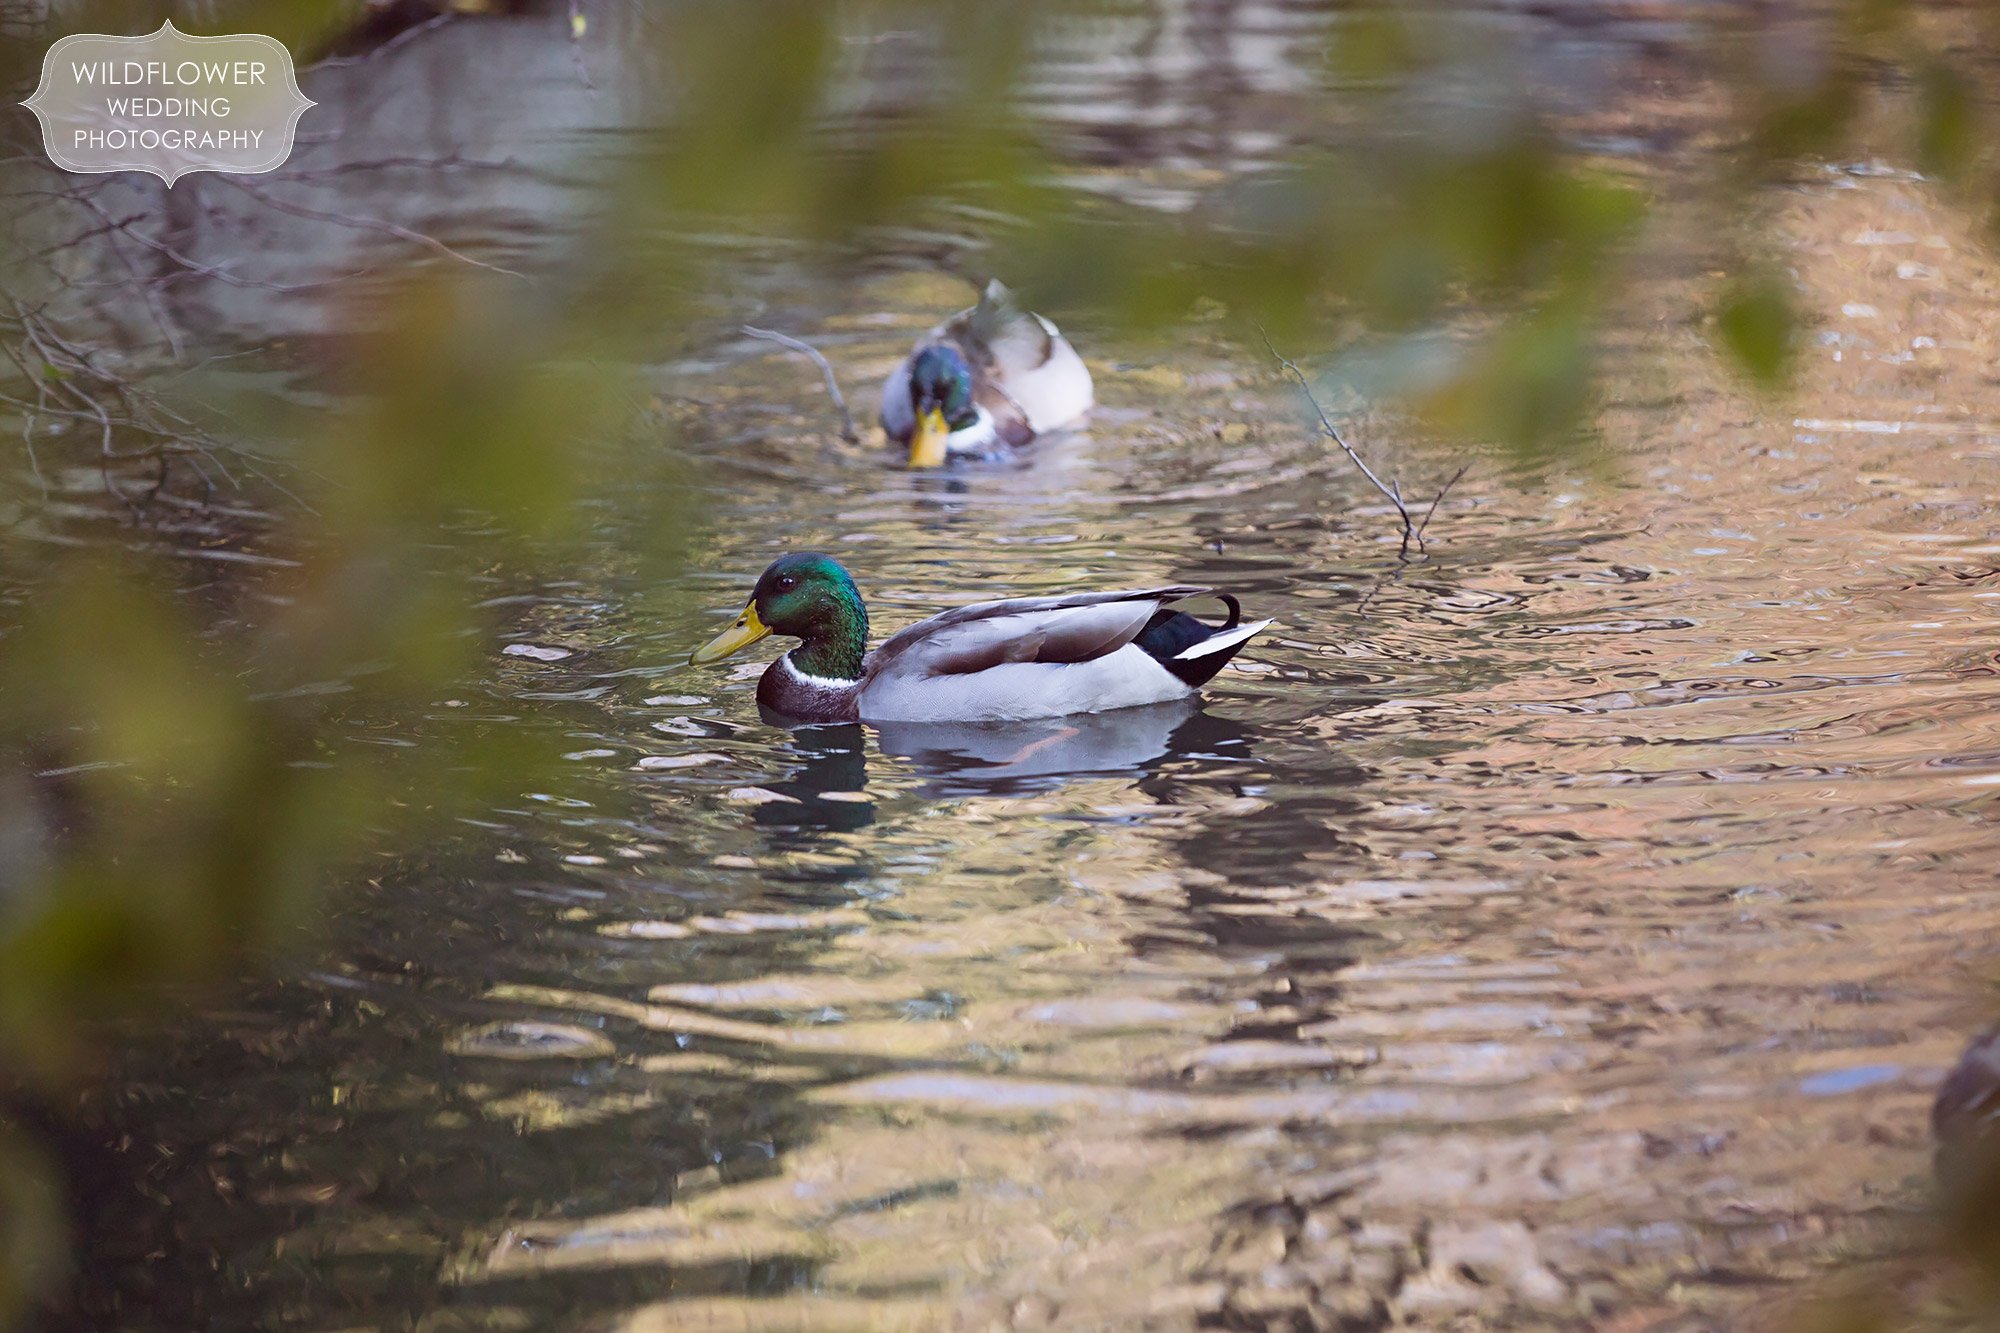 Nature inspired engagement photos with ducks in the pond at Loose Park.